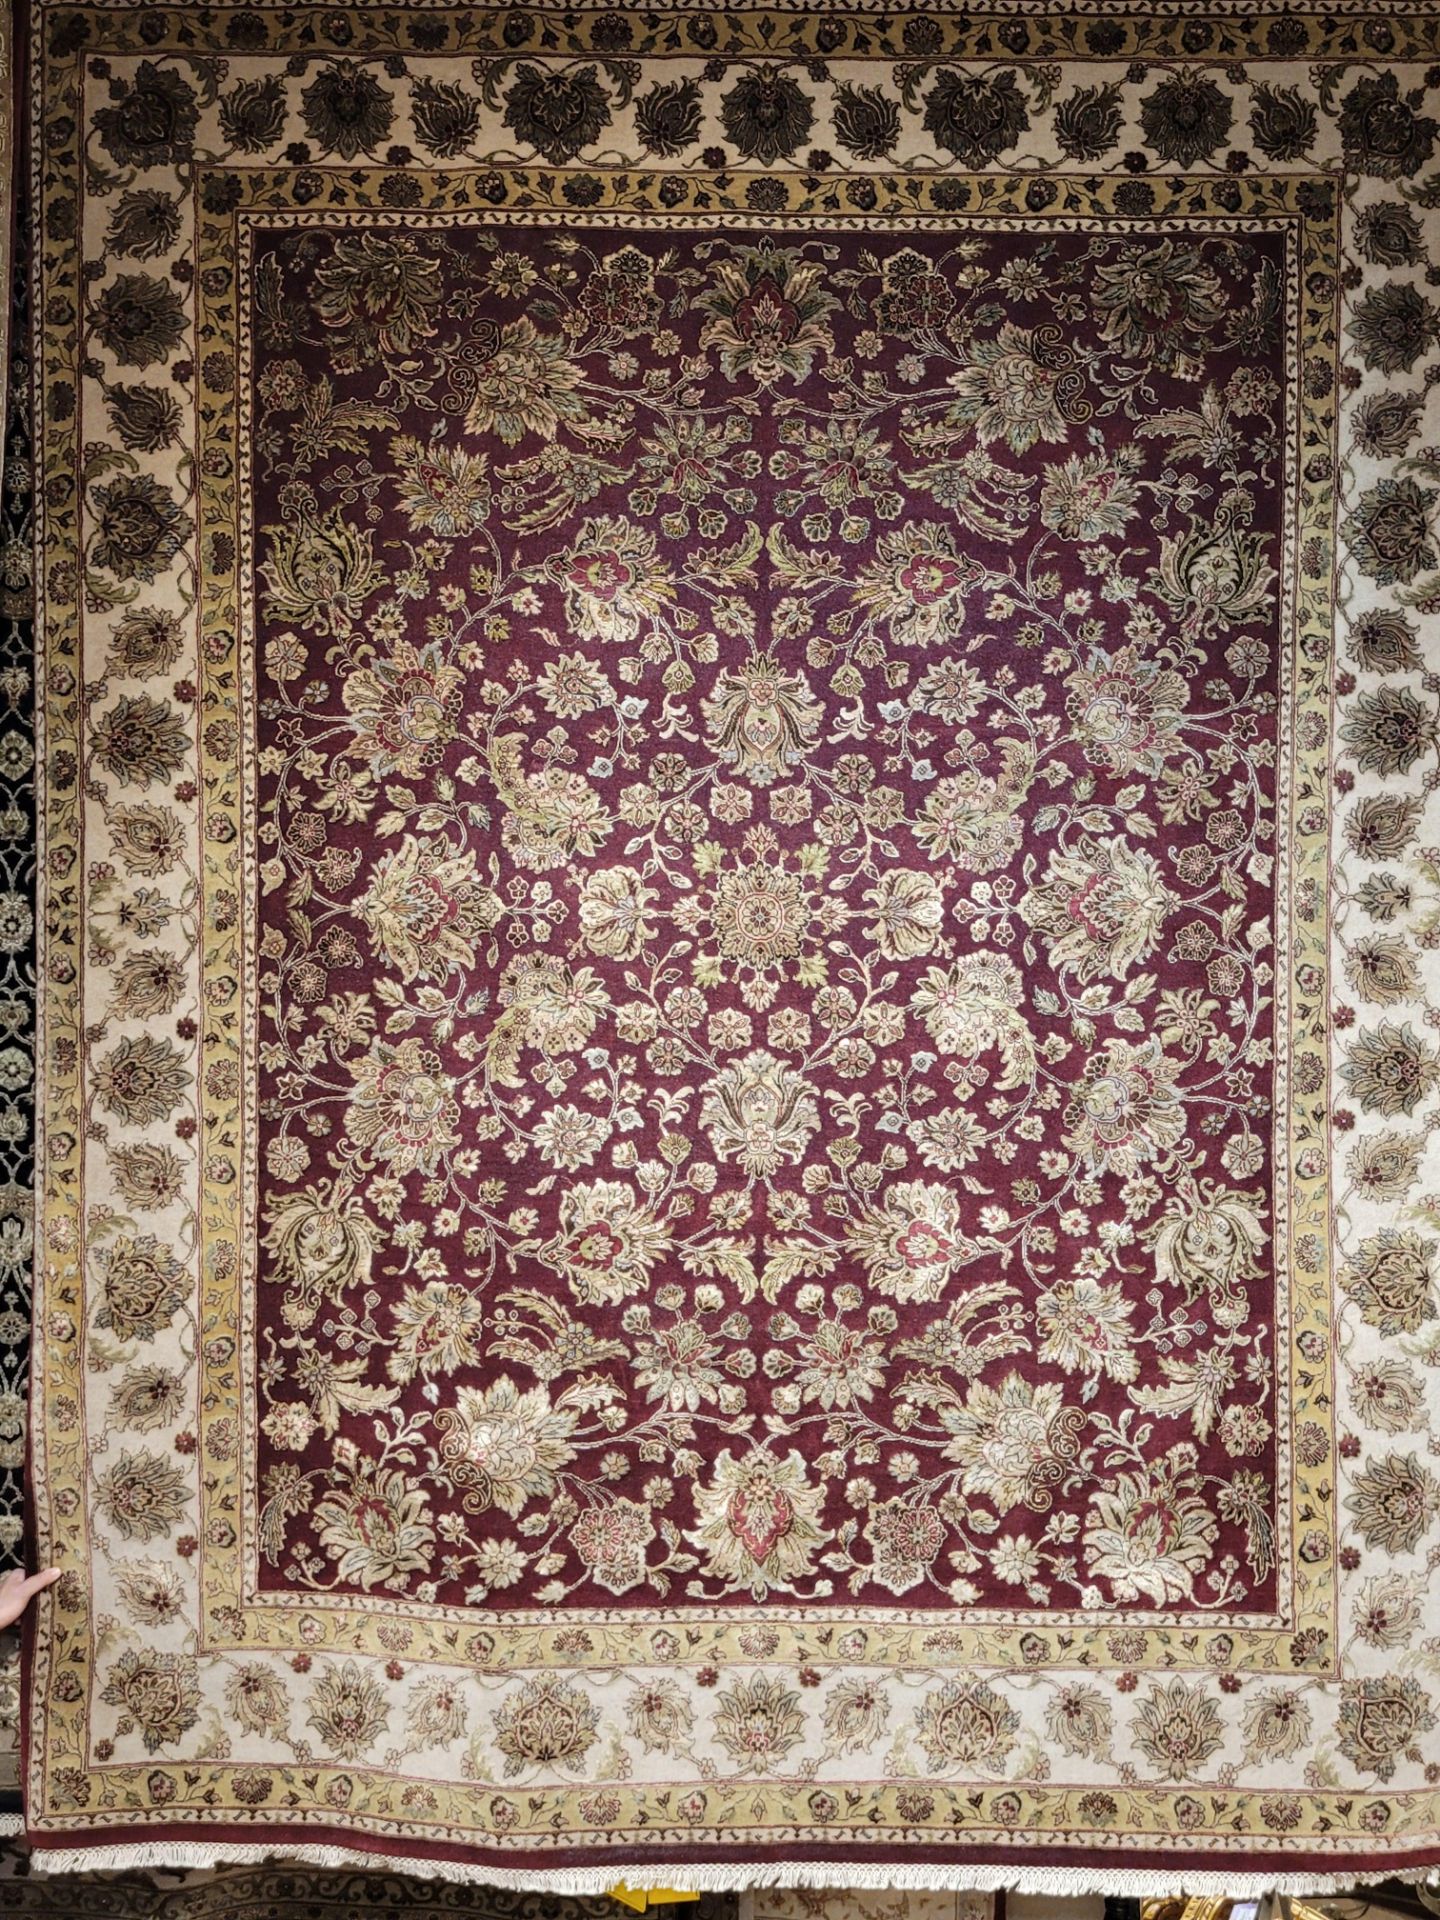 8'3" X 10'3" DEEP RED/BEIGE - WOOL/ART. SILK HAND KNOTTED IN INDIA - MSRP $12,475.00 (LOCATED IN